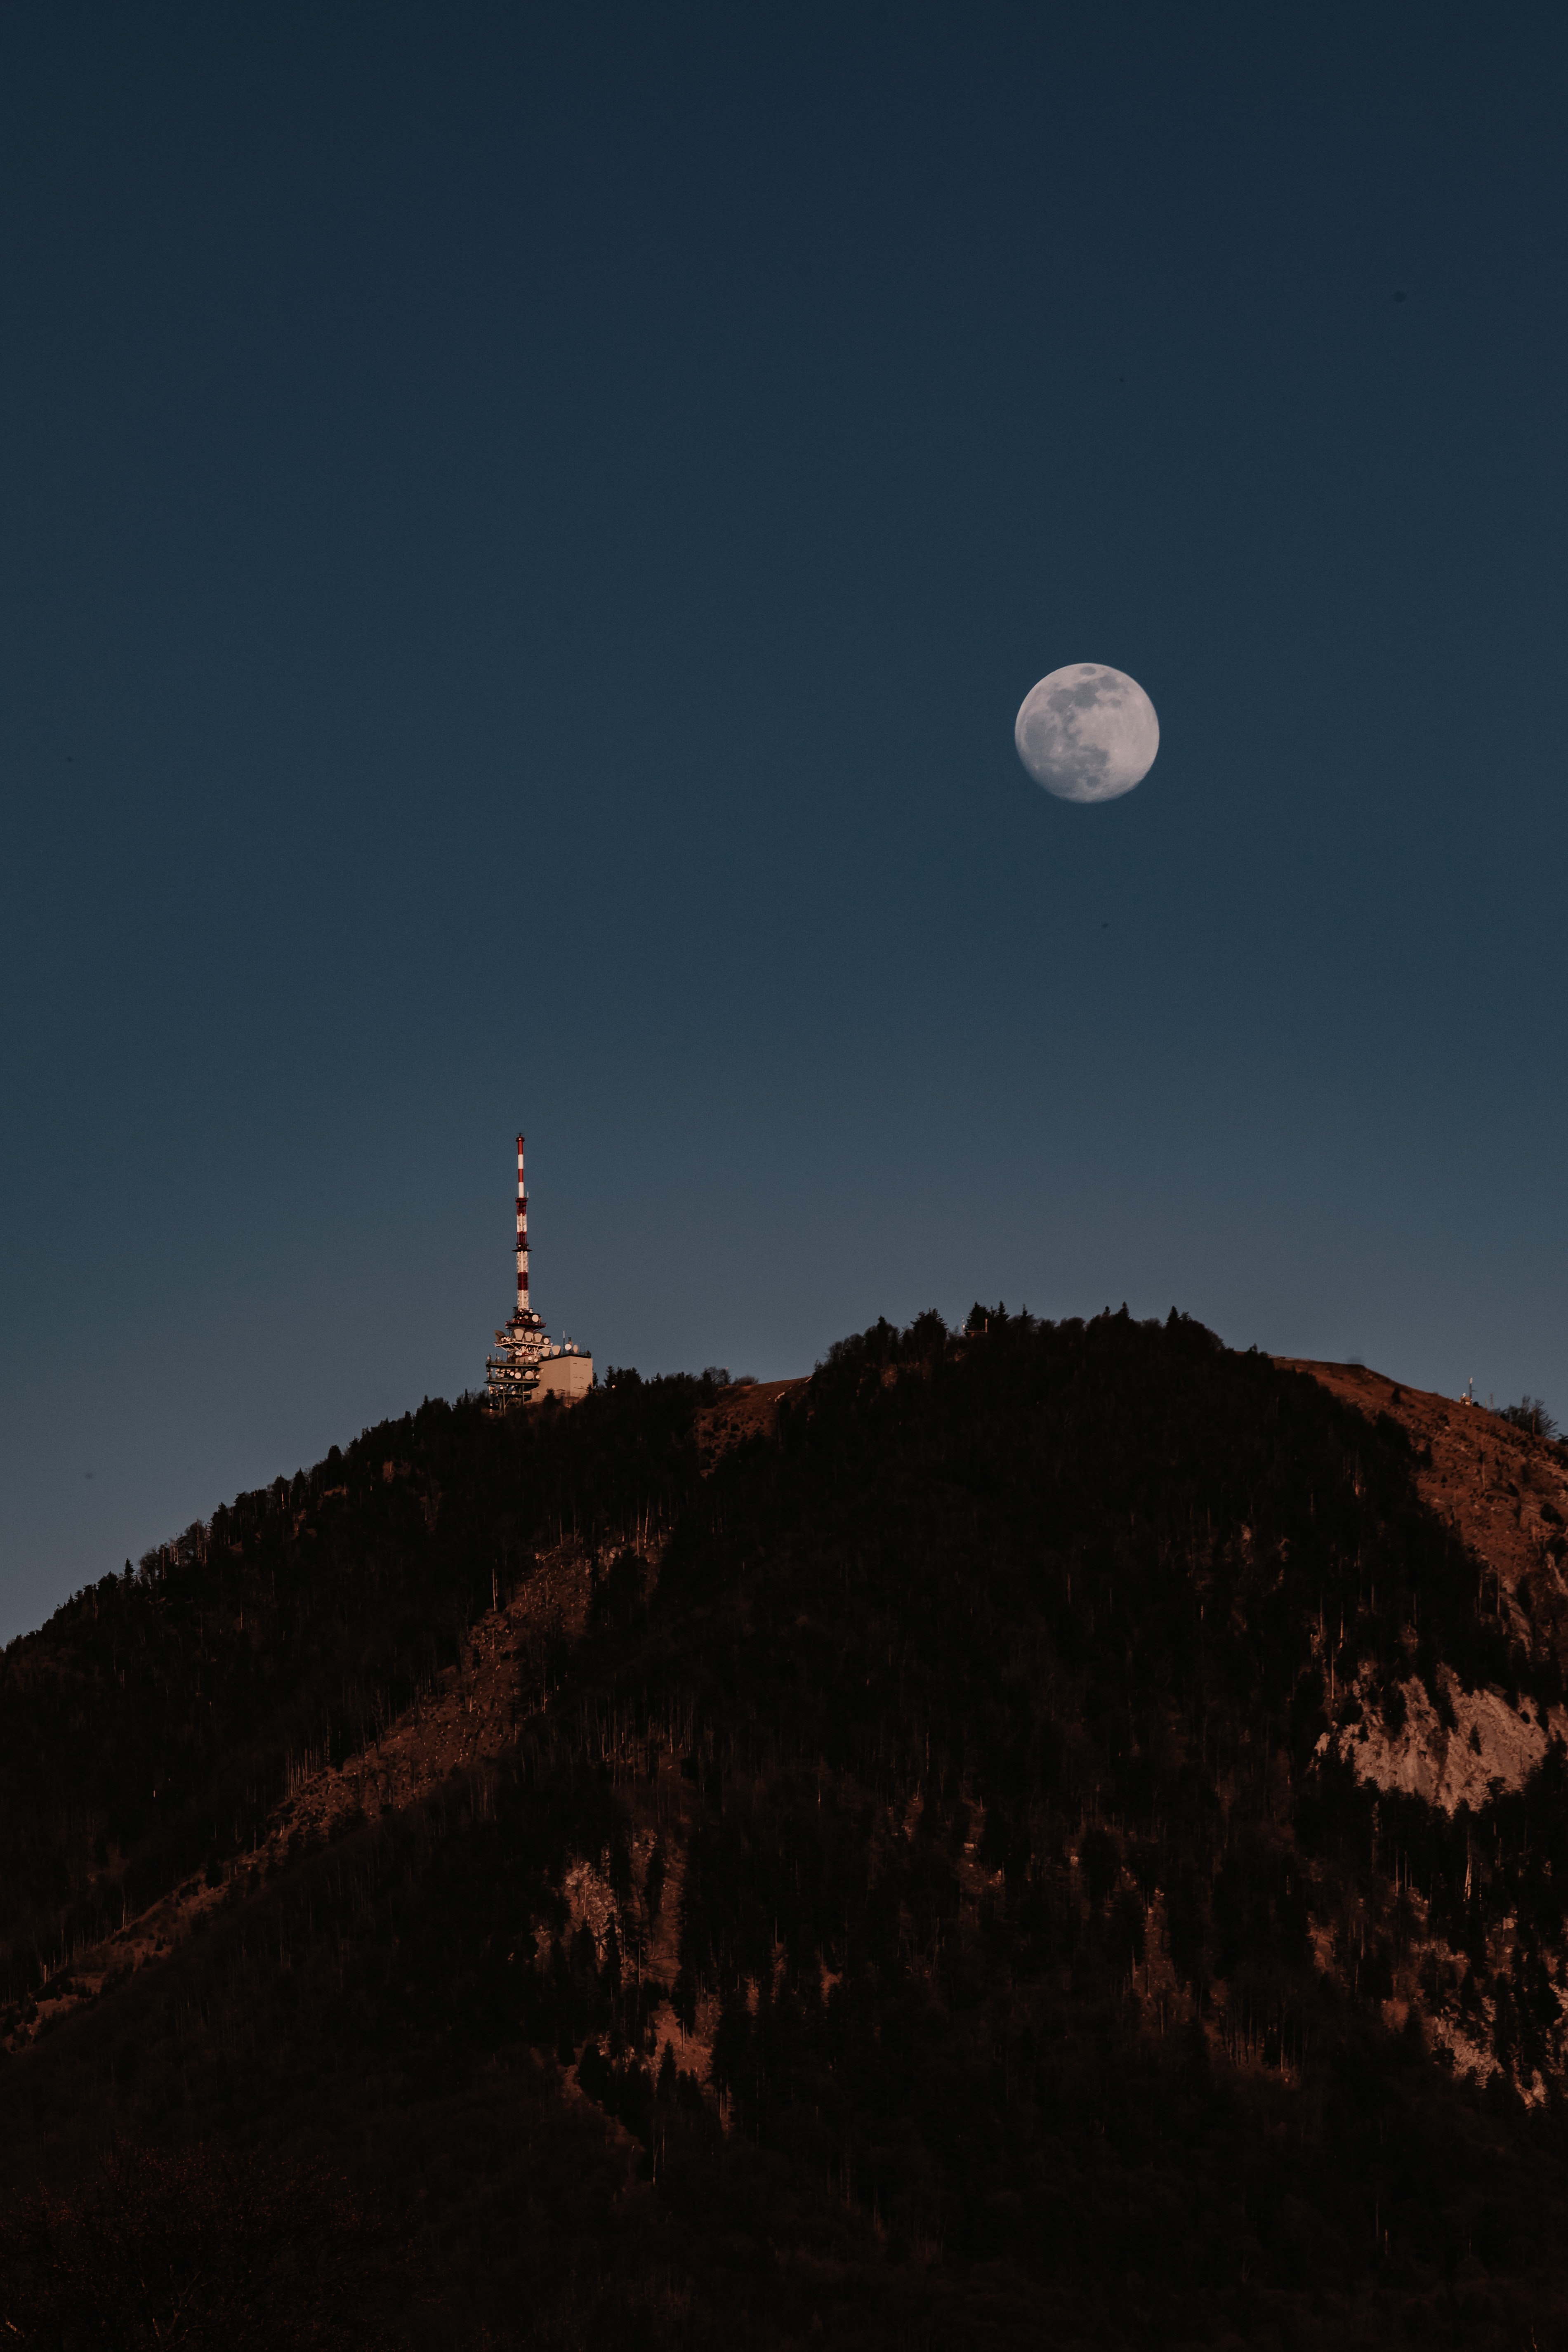 hill, nature, trees, moon, tower wallpaper for mobile